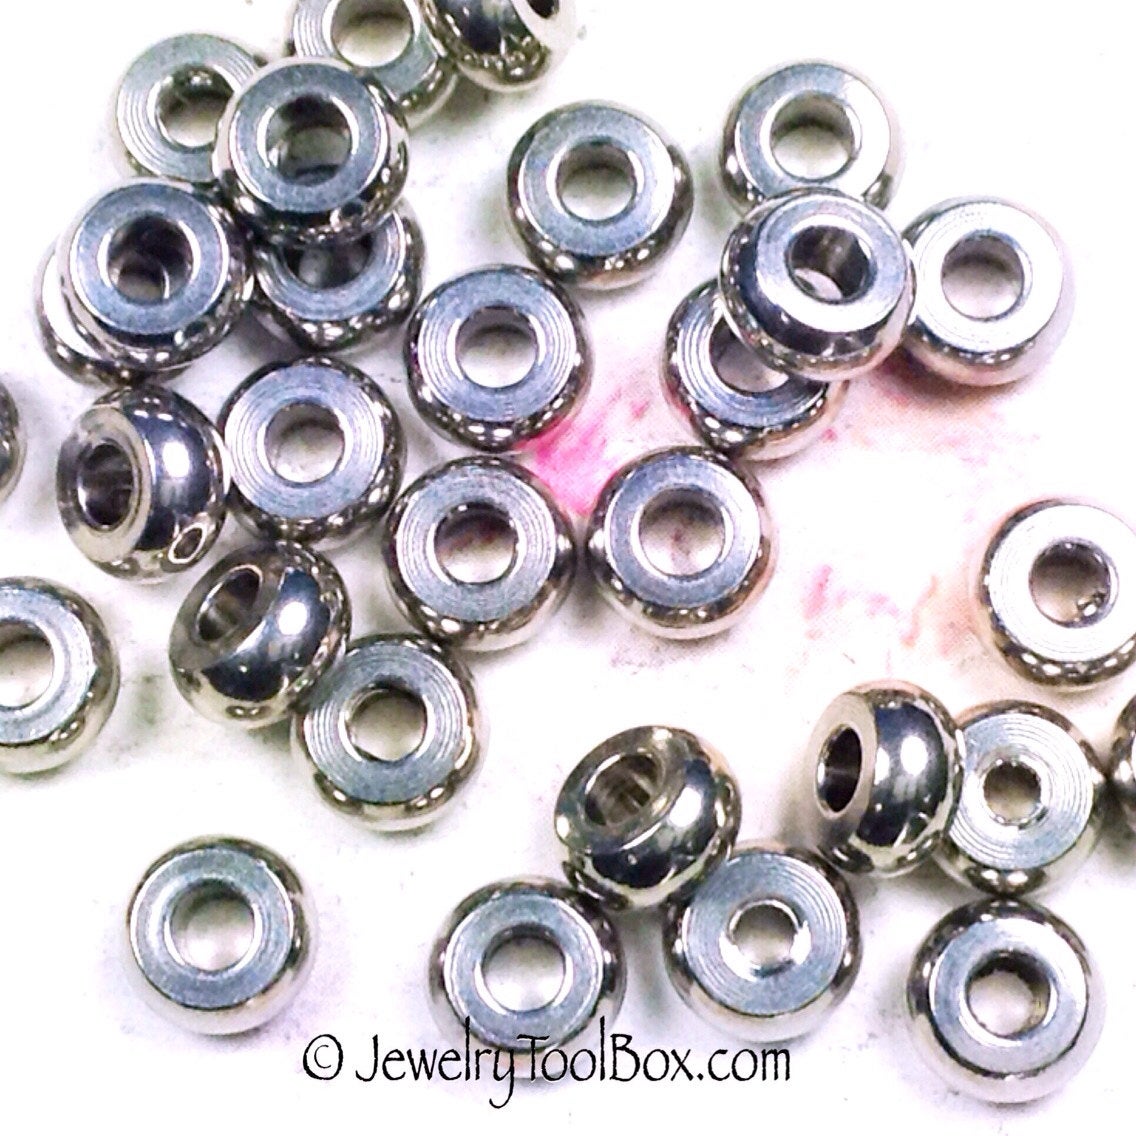 6mm Abacus Beads, Stainless Steel 6x3mm, 2mm Hole, Lot Size 200